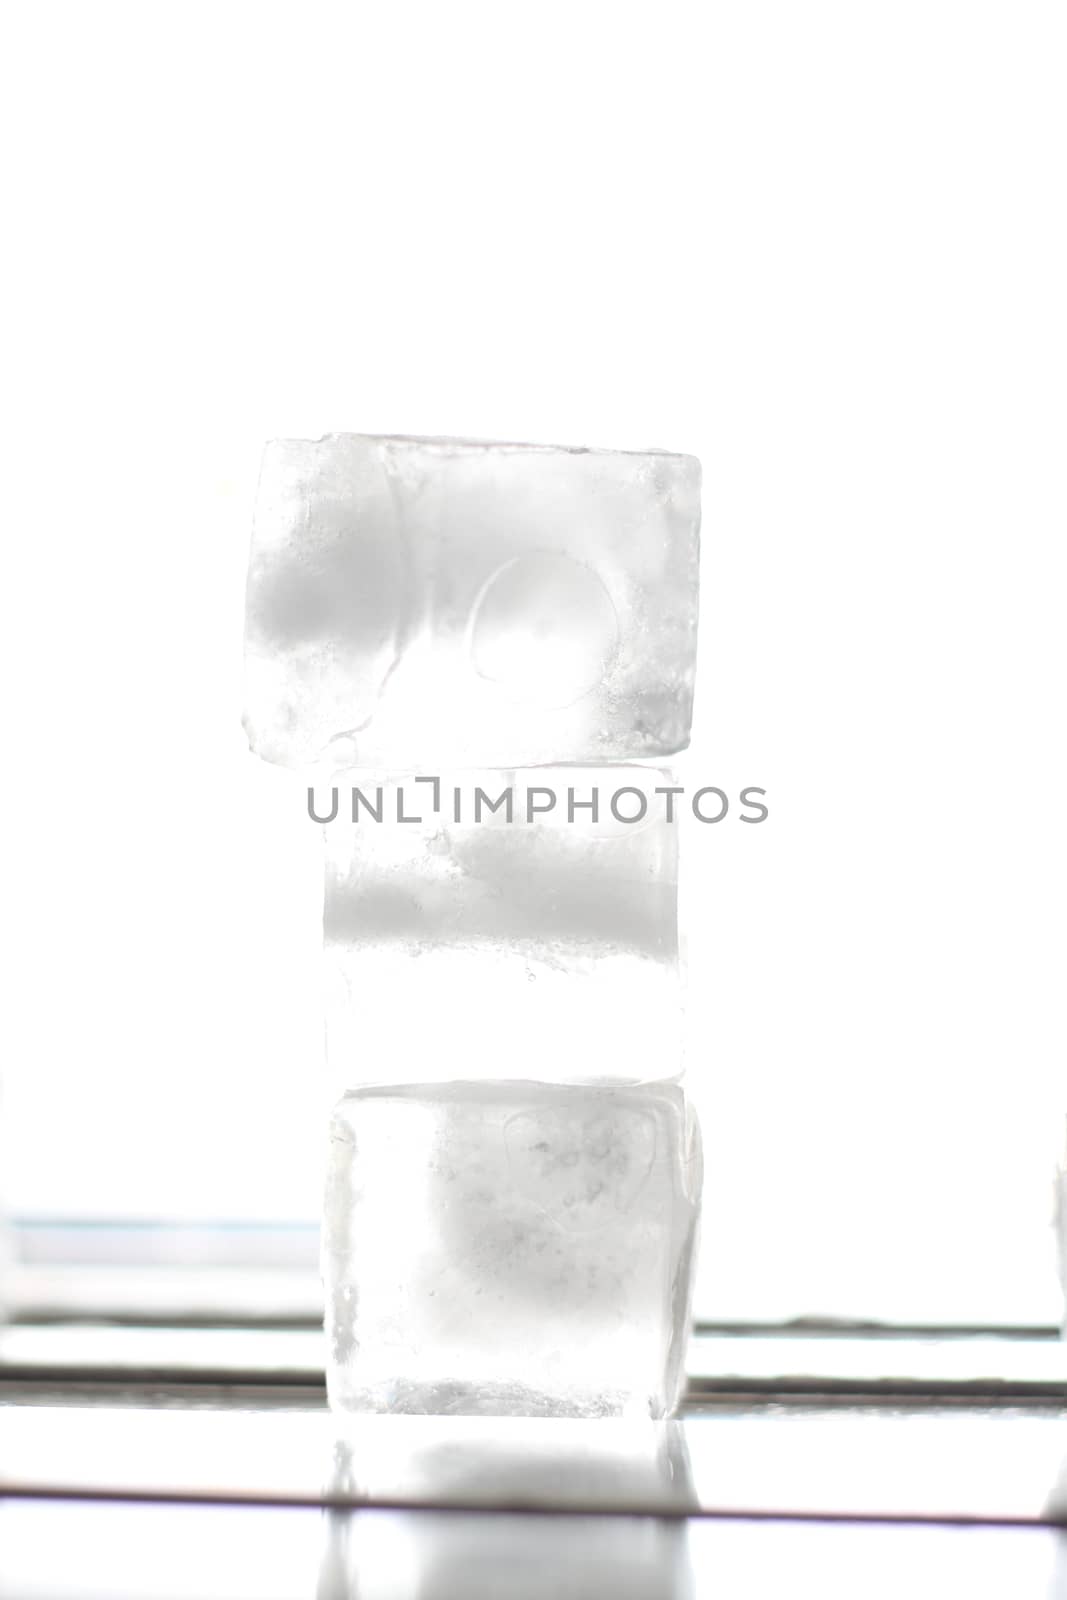 ice cubes by Tomjac1980